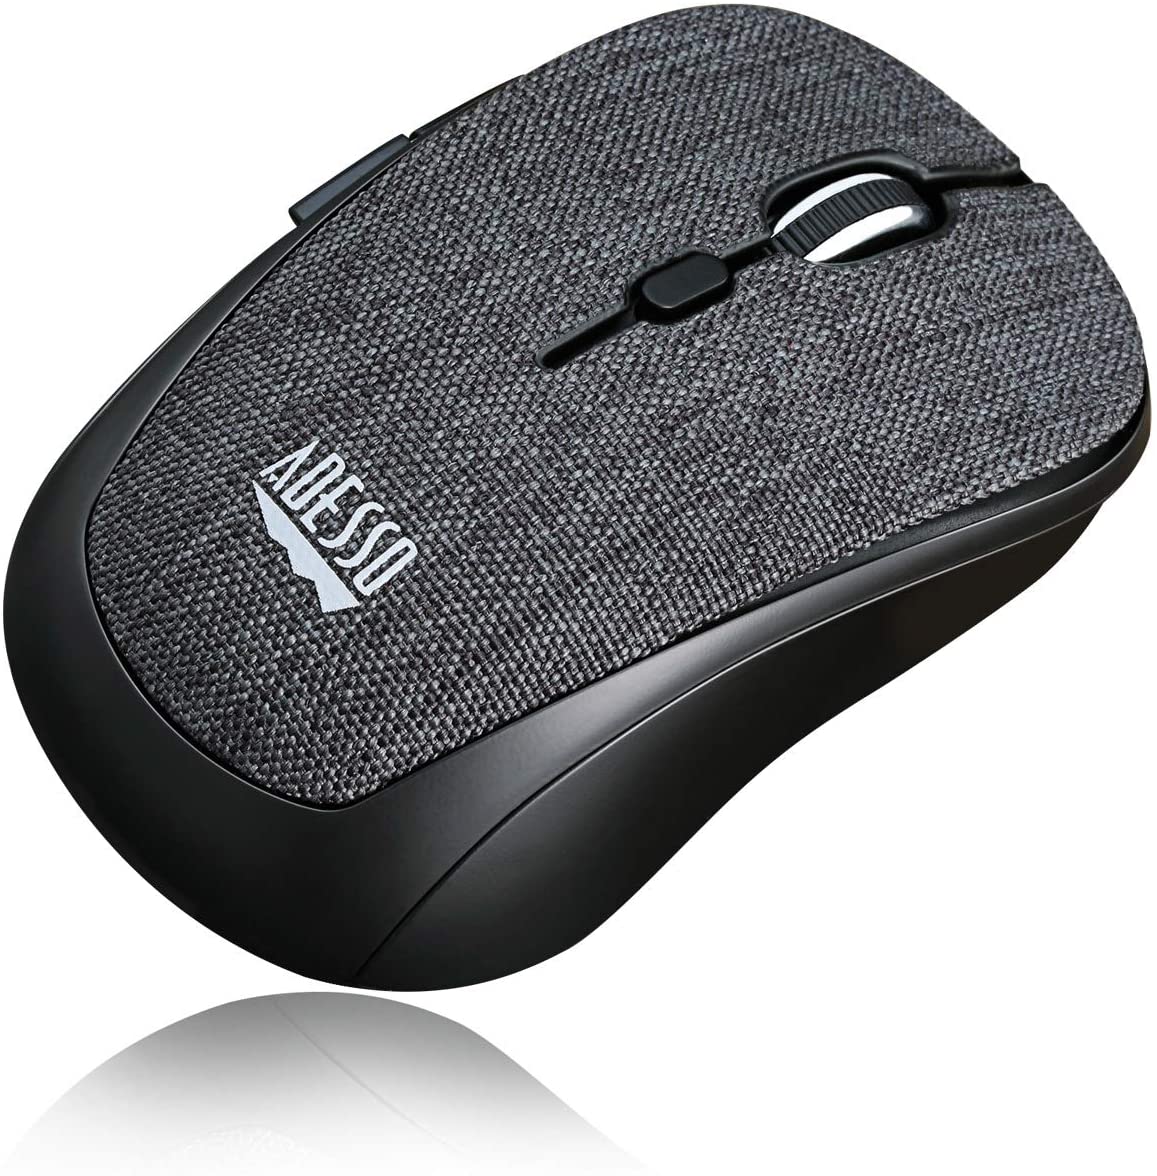 Adesso iMouse S80B 2.4Ghz Fabric Wireless Black Fabric Mini Optical Mouse, 5-Button, Black - Dealtargets.com